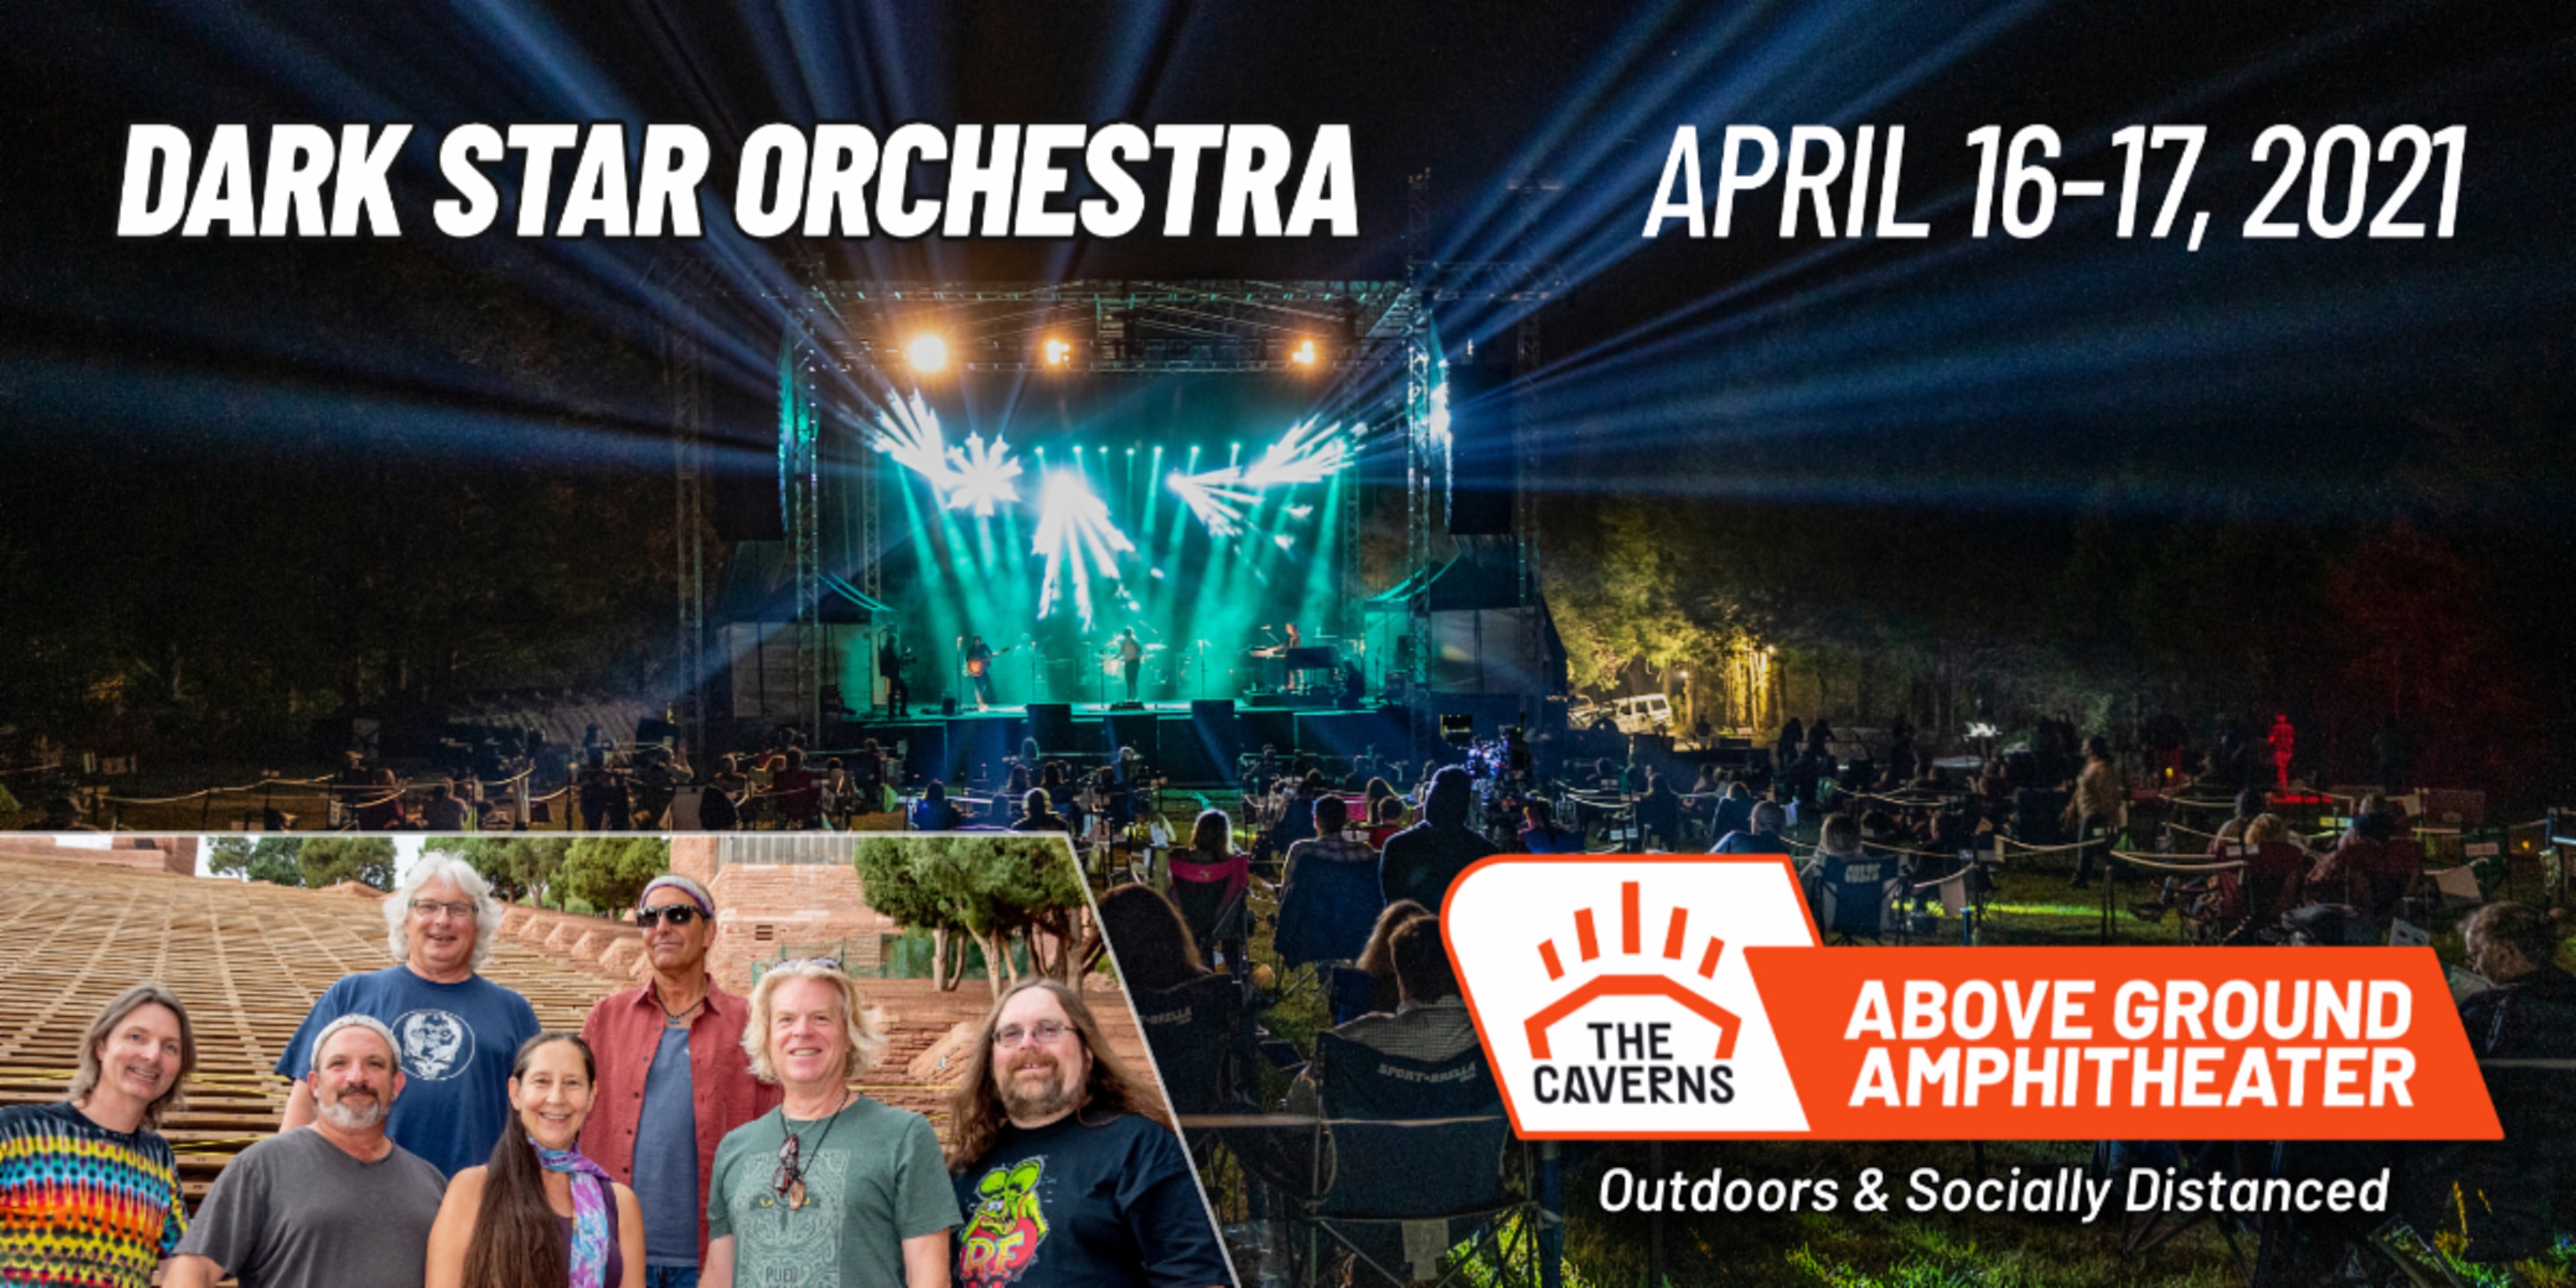 Dark Star Orchestra is Coming to The Caverns Above Ground Amphitheater